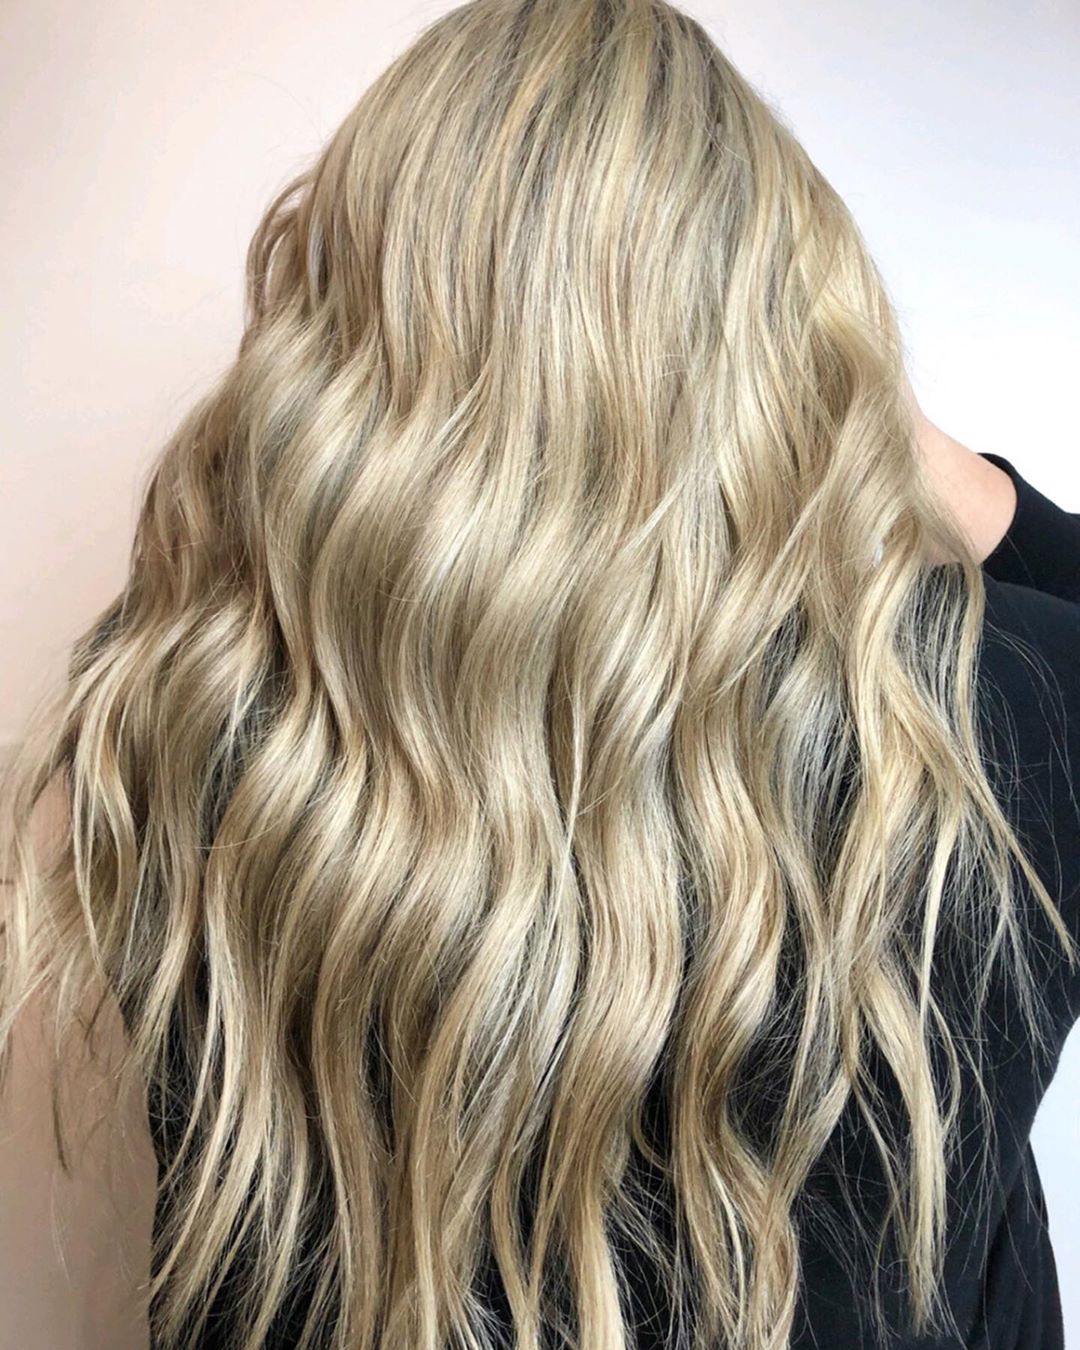 18 Flattering Beige Blonde Hair Color Ideas for Every Skin Tone